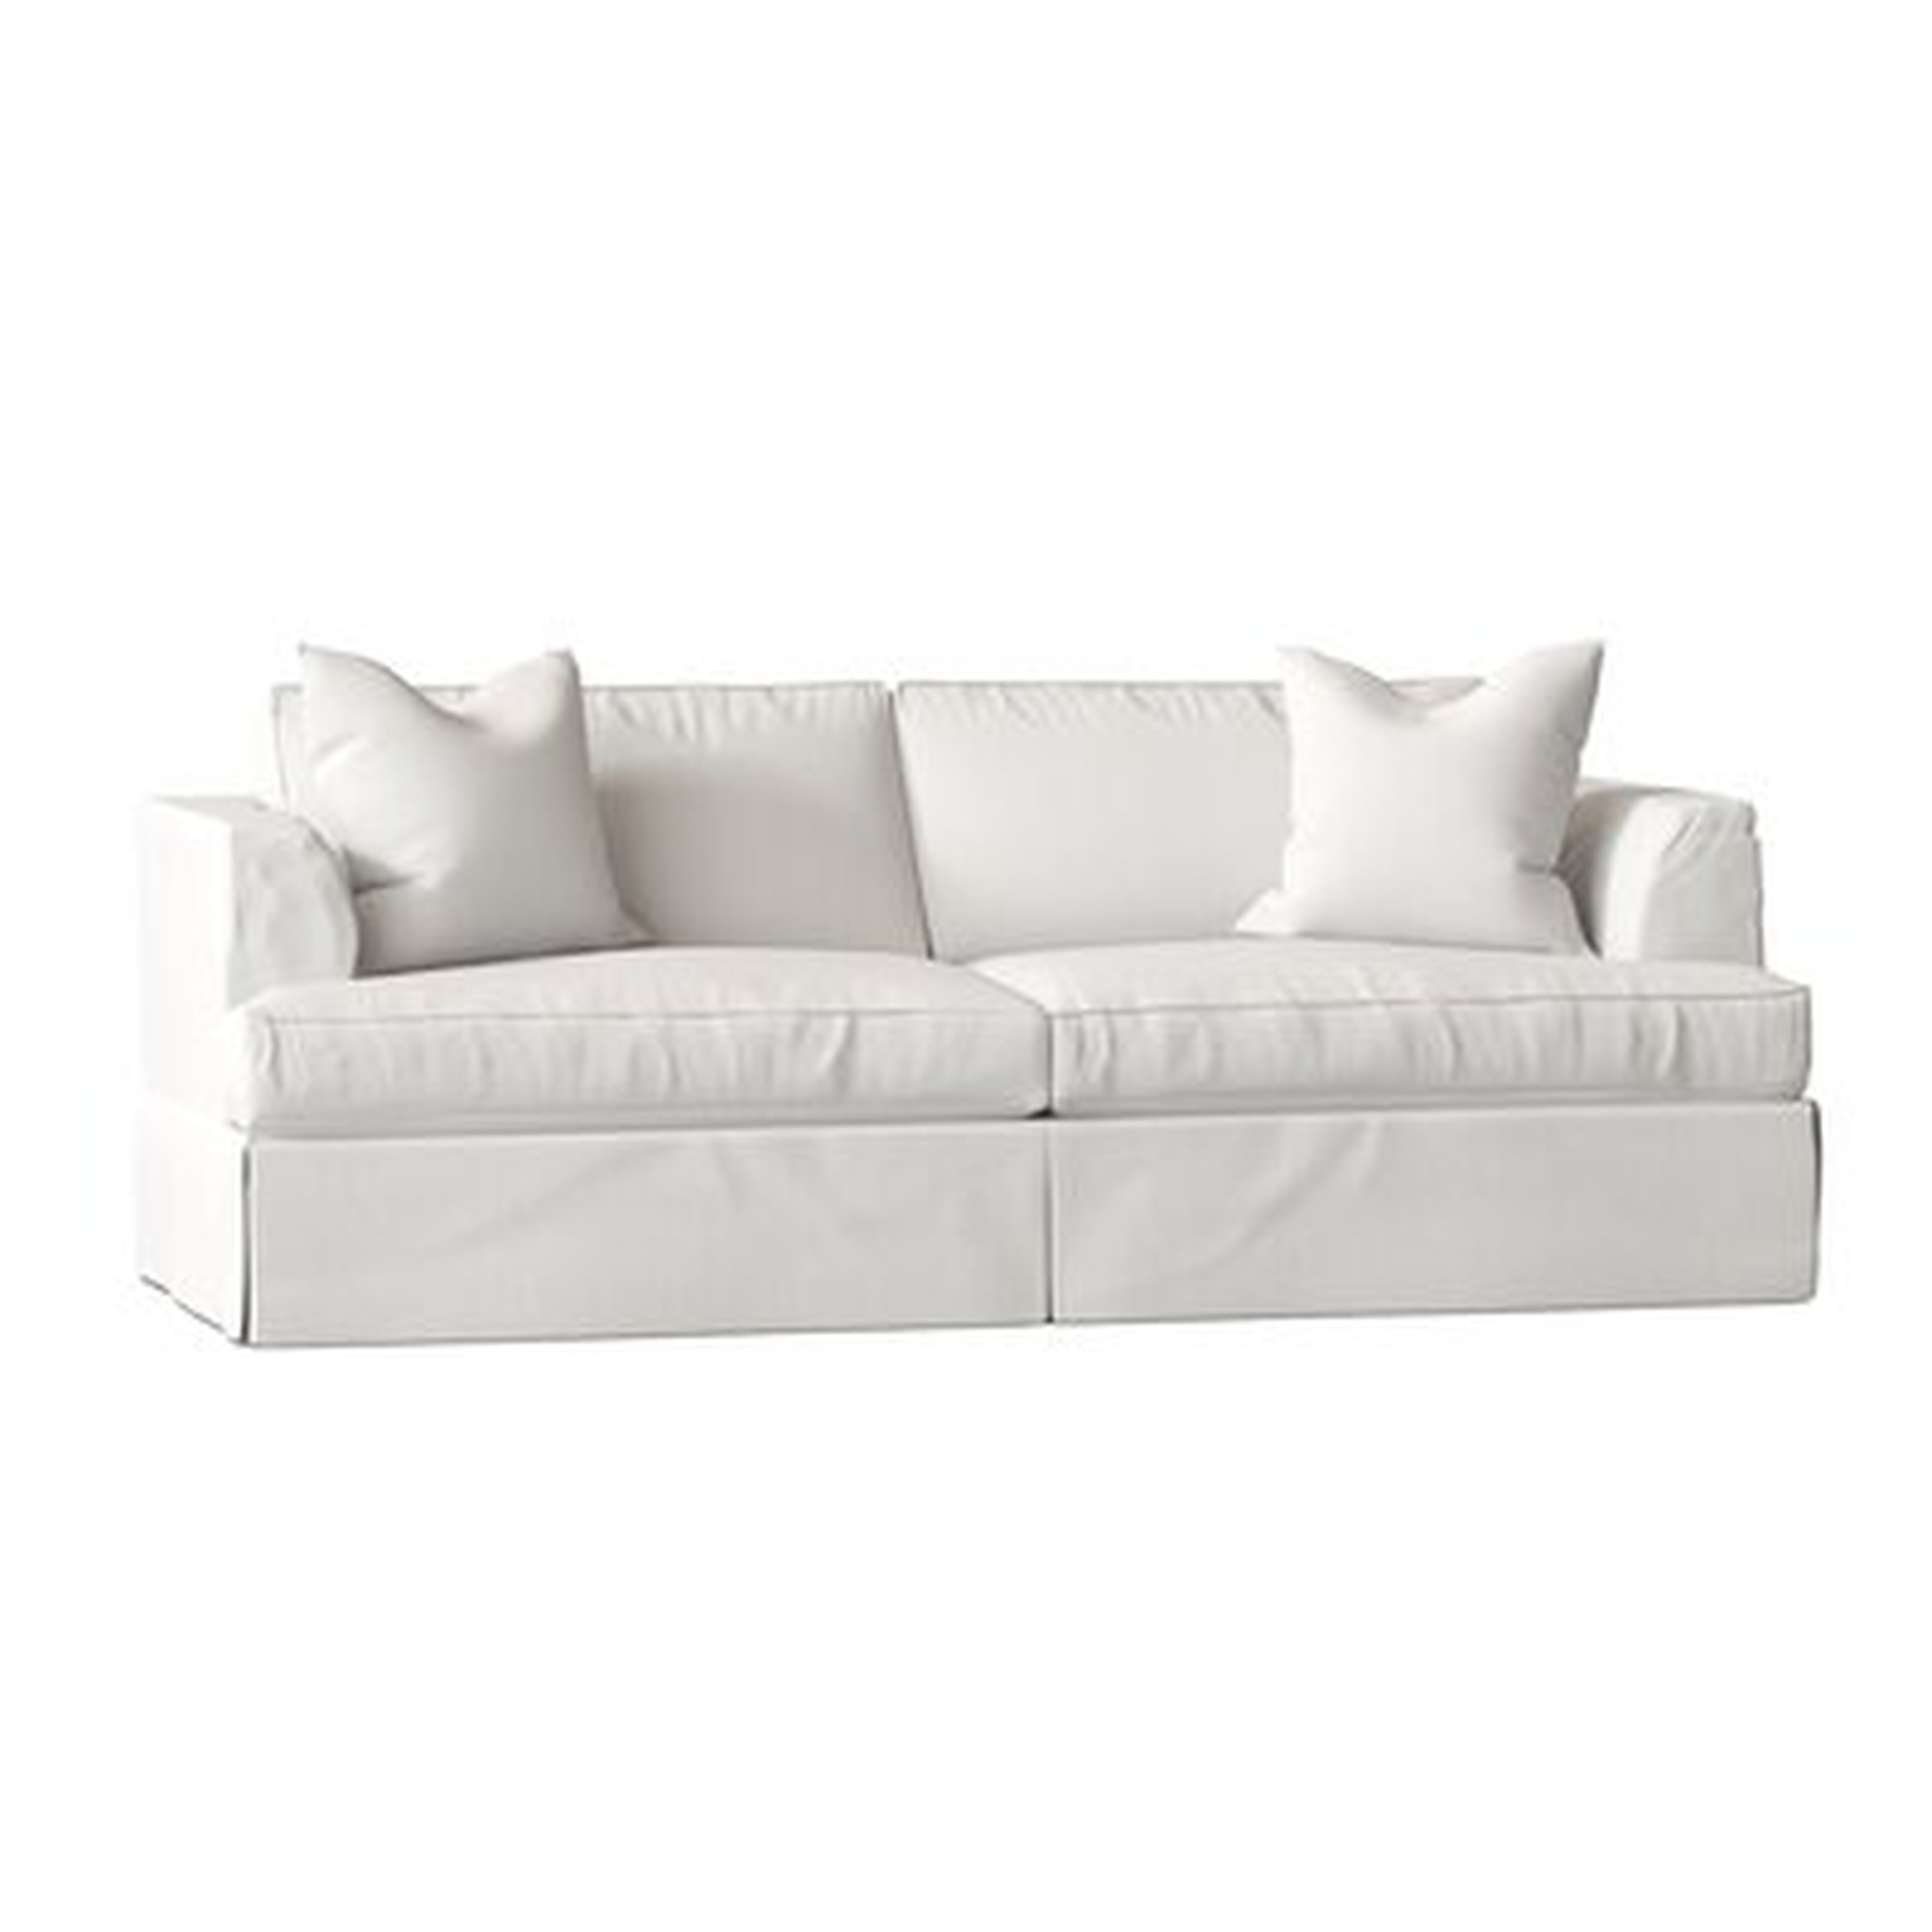 Lucia 93" Recessed Arm Slipcovered Sofa Bed - Birch Lane